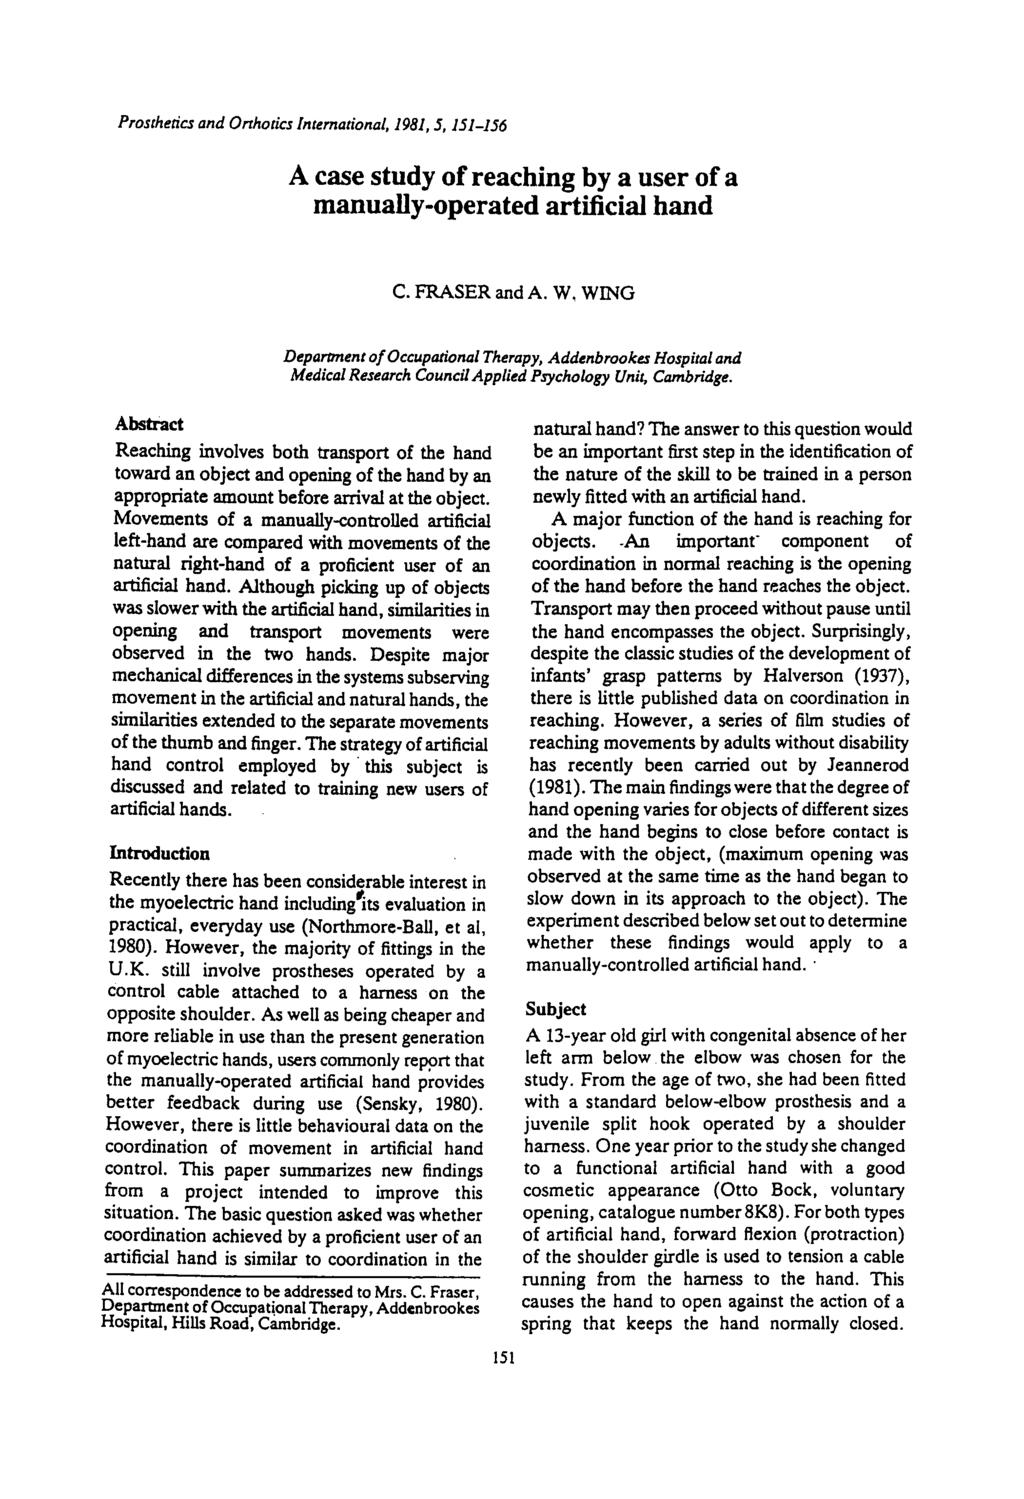 Prosthencs and onhotics International, 1981.5. 151-156 A case study of reaching by a user of a manually-operated artificial hand C. FRASER and A. W.